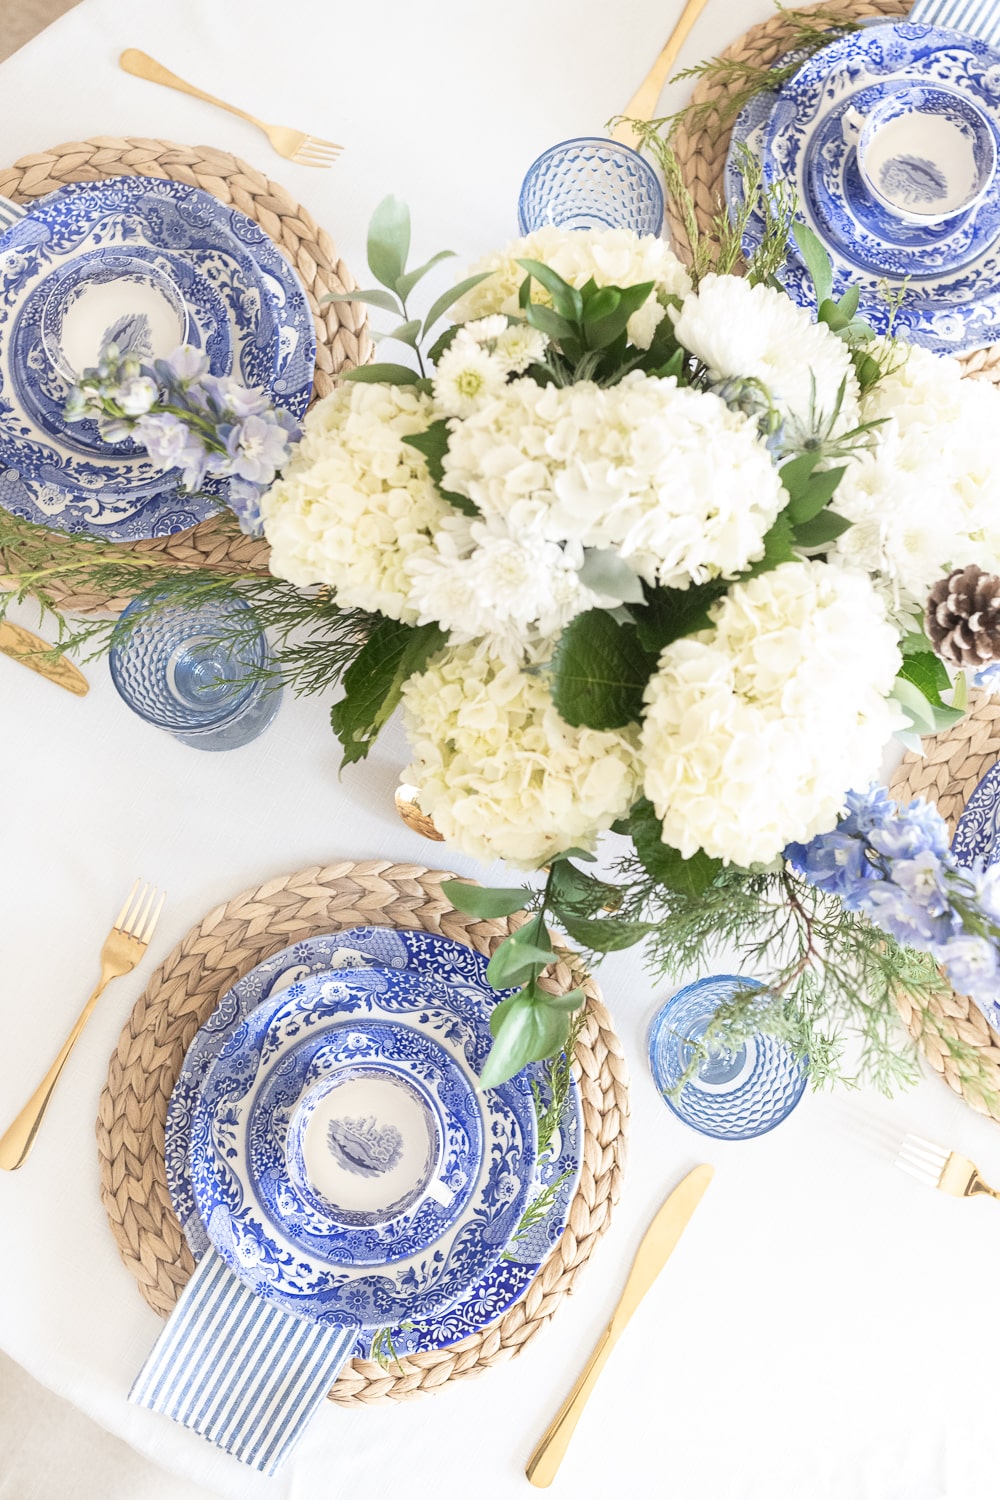 Elegant blue and white winter table decor designed by southern lifestyle blogger Stephanie Ziajka on Diary of a Debutante